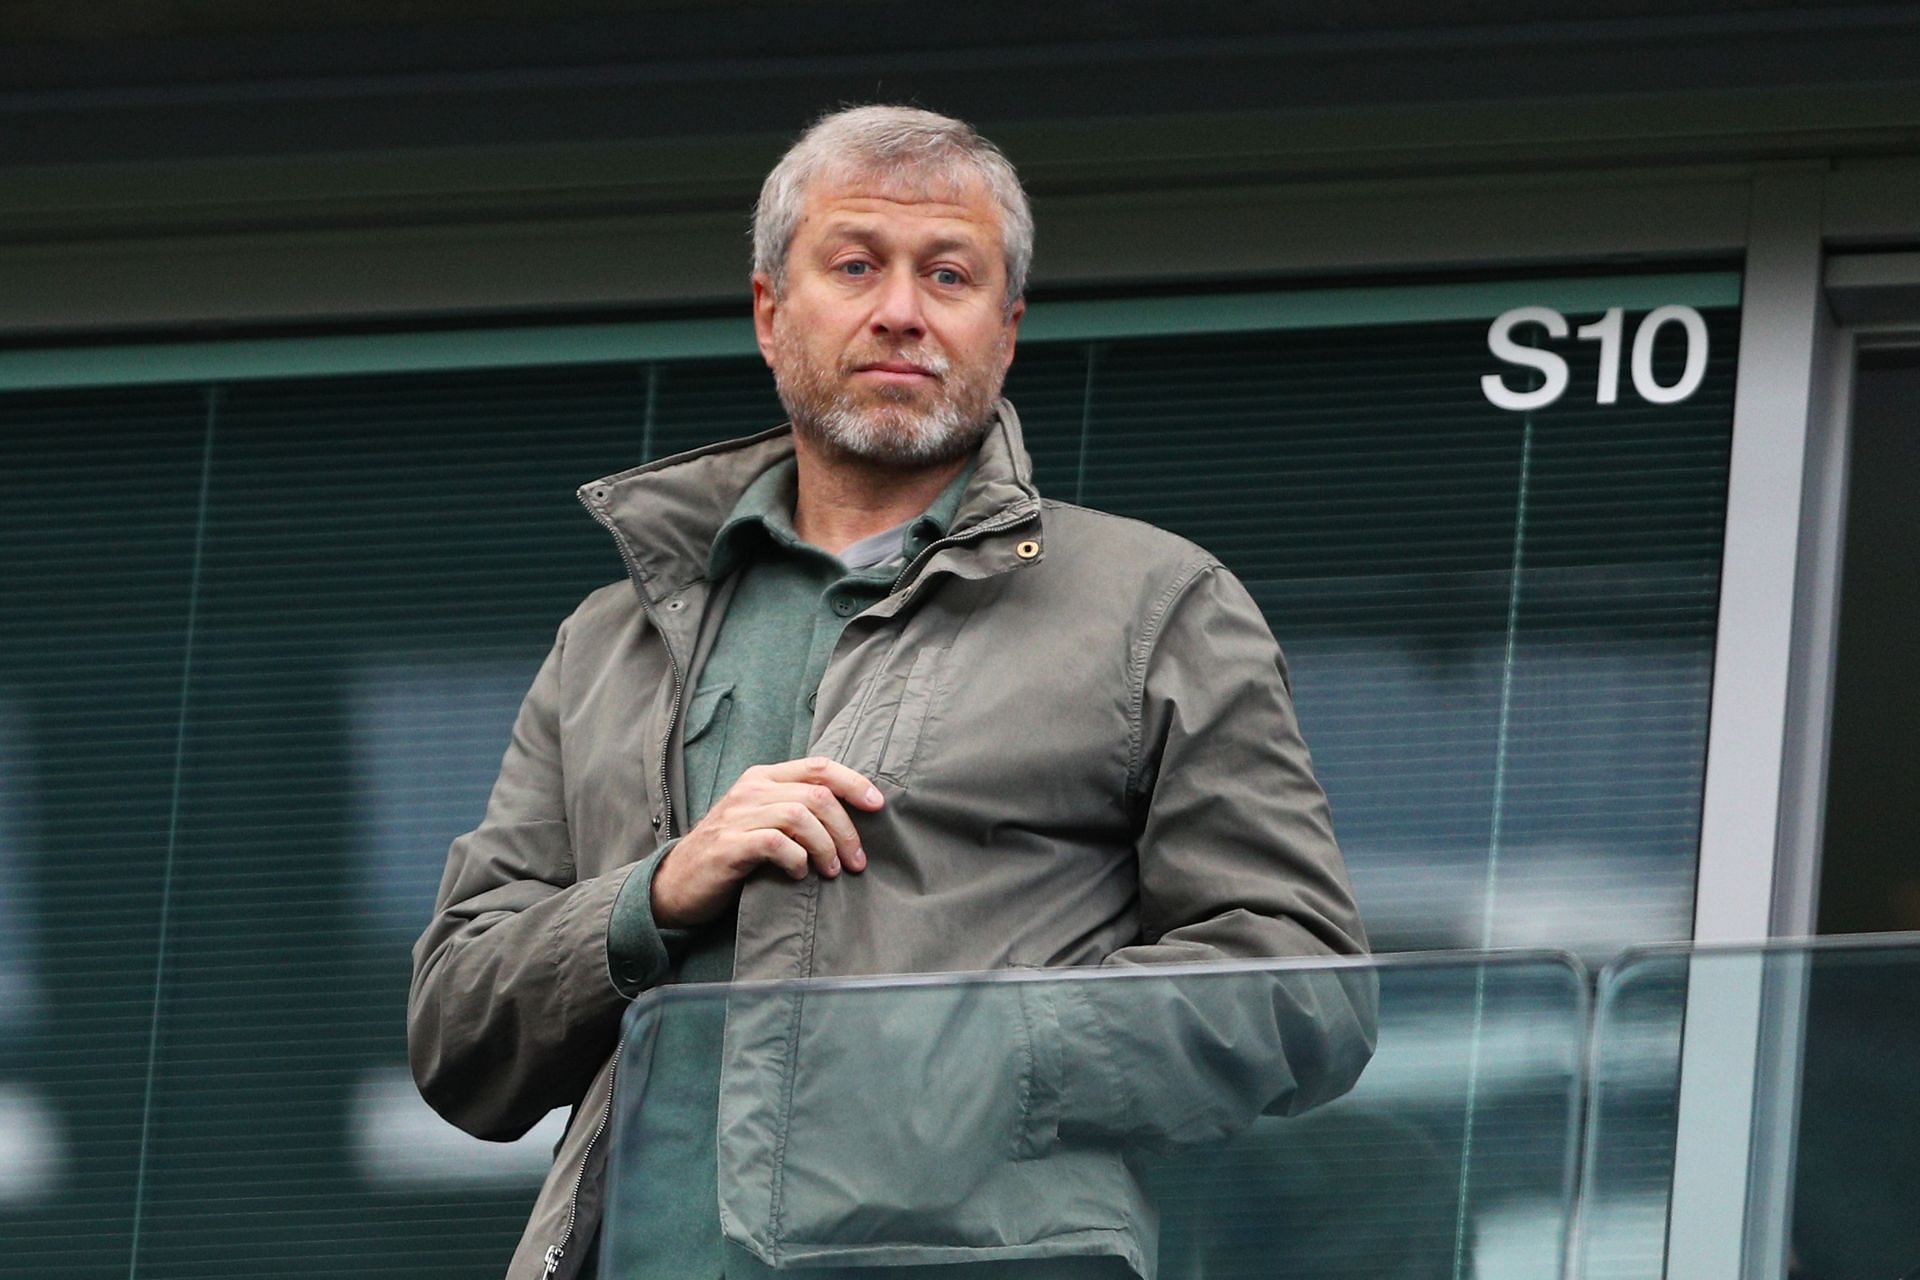 Abramovich has owned the club since 2003